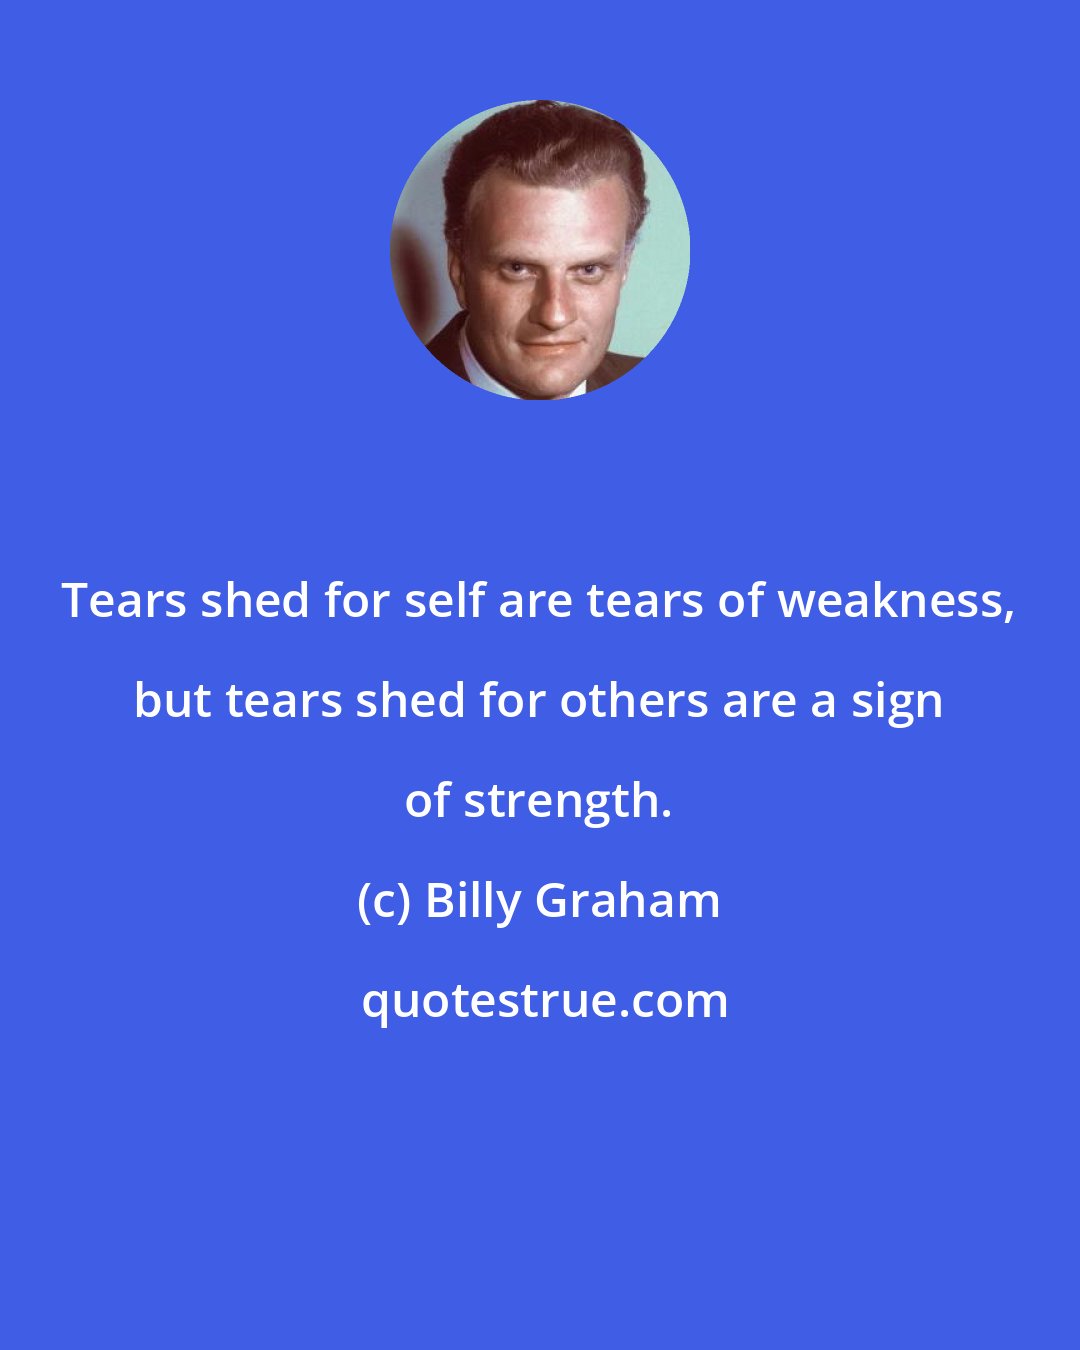 Billy Graham: Tears shed for self are tears of weakness, but tears shed for others are a sign of strength.